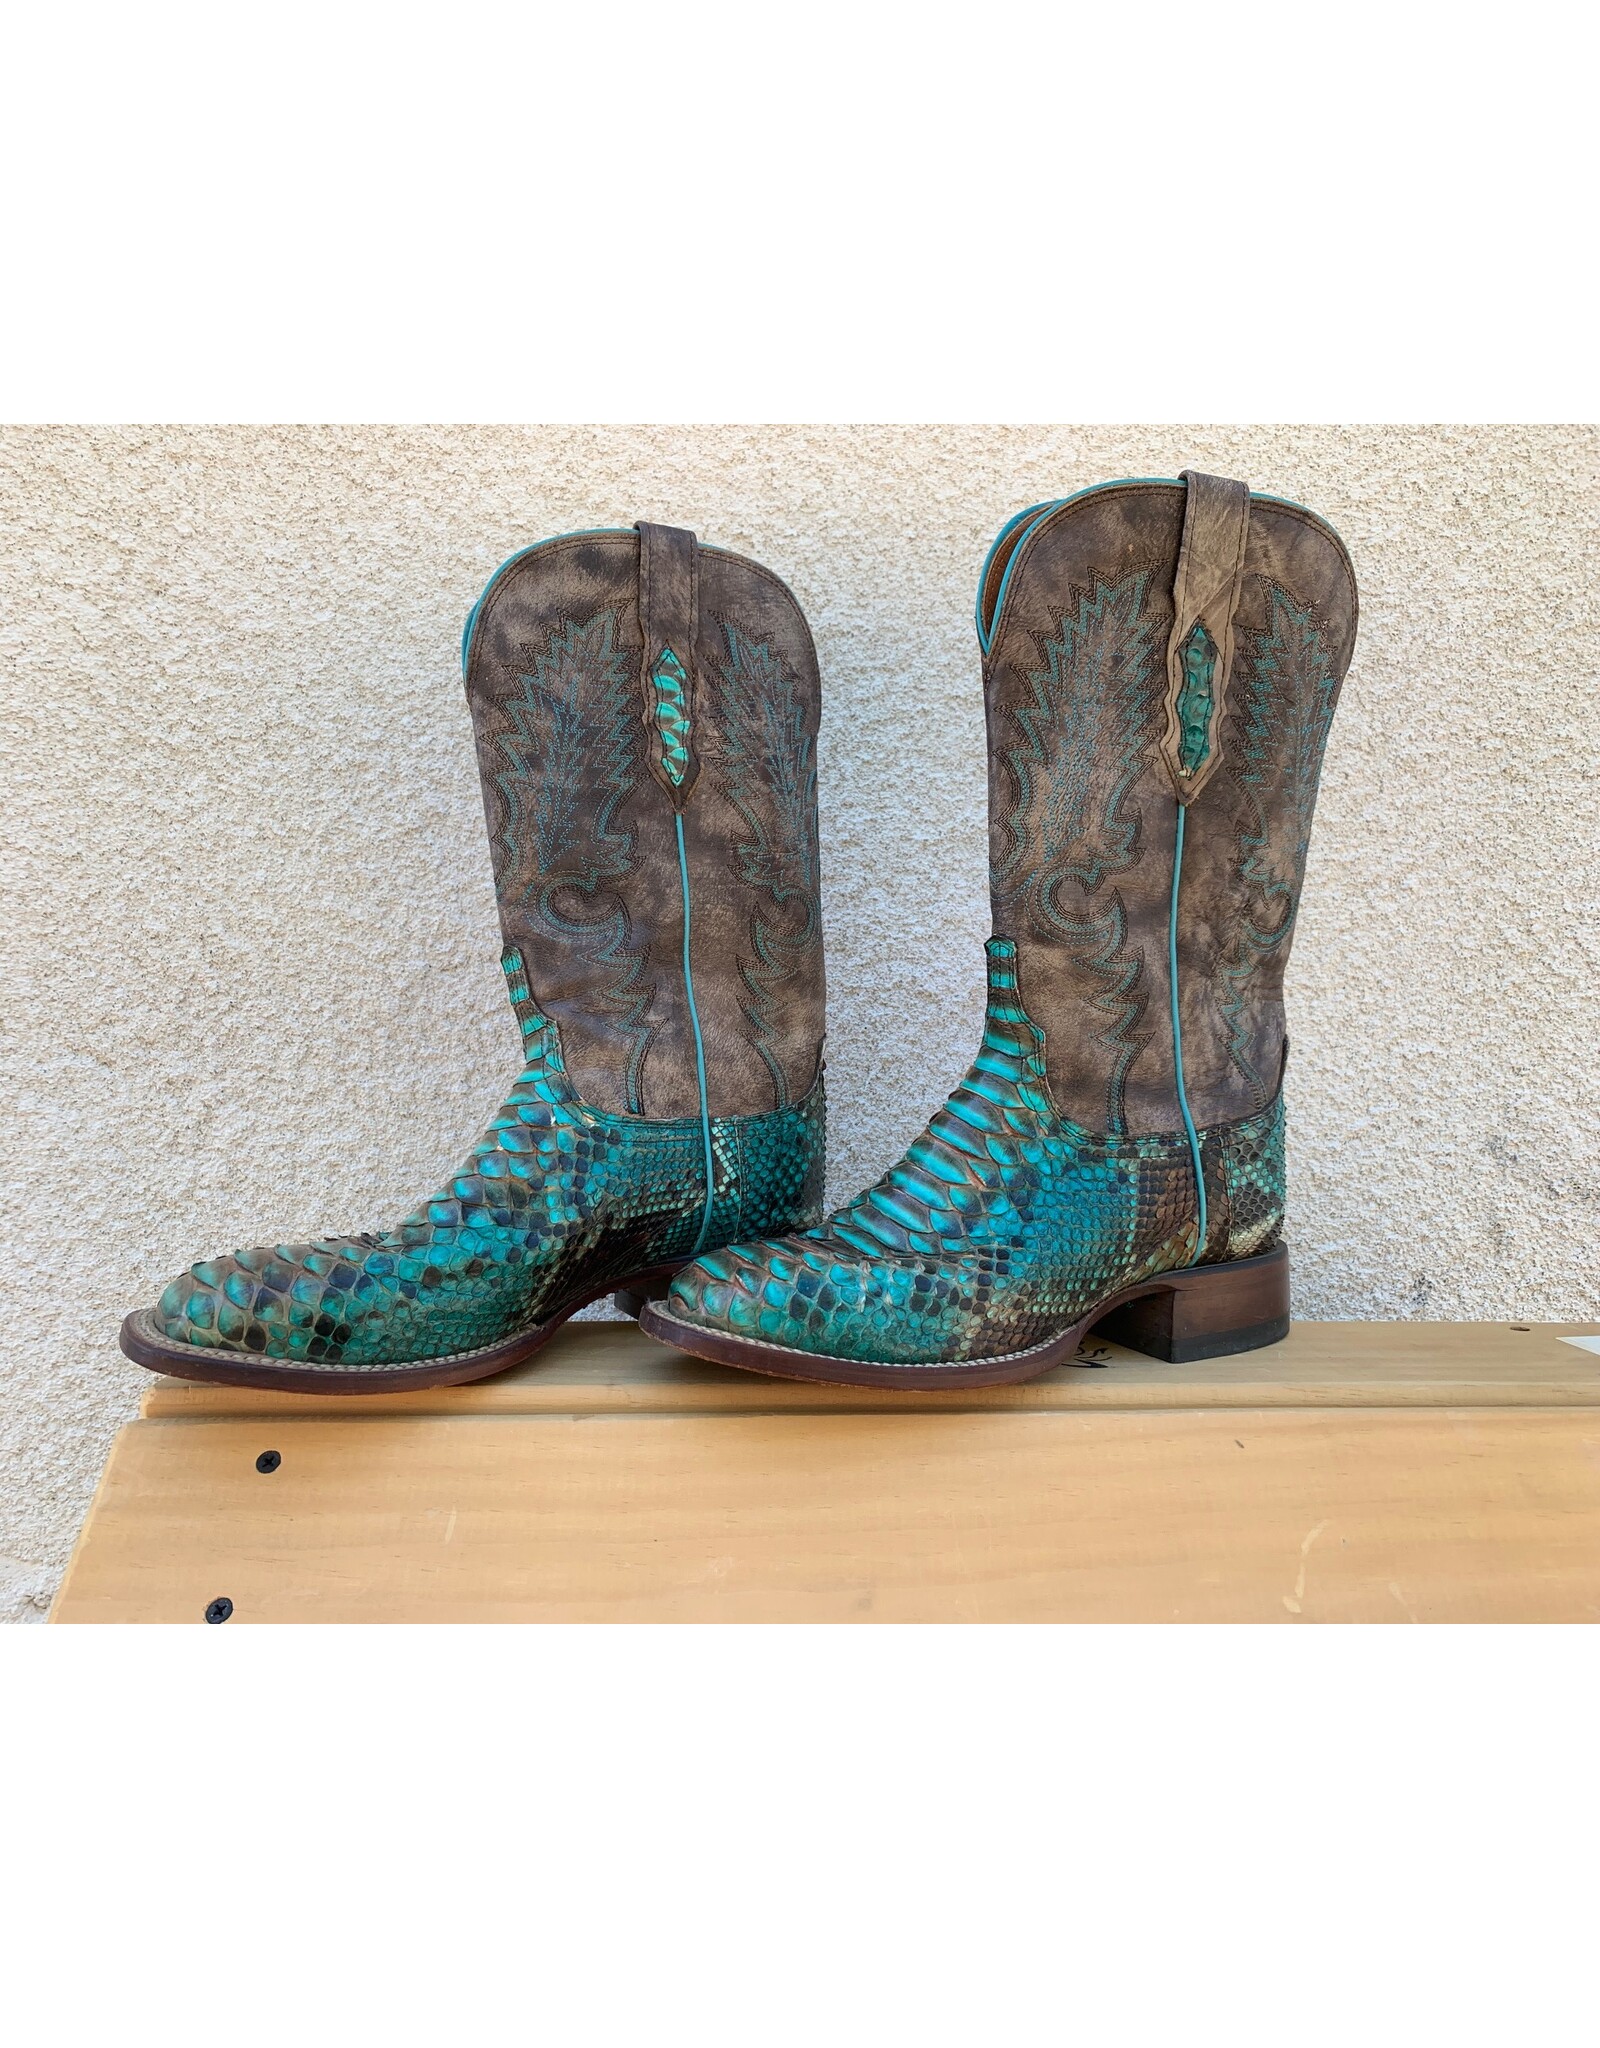 Lucchese Turquoise Python Square Toe Western Boots sz 9